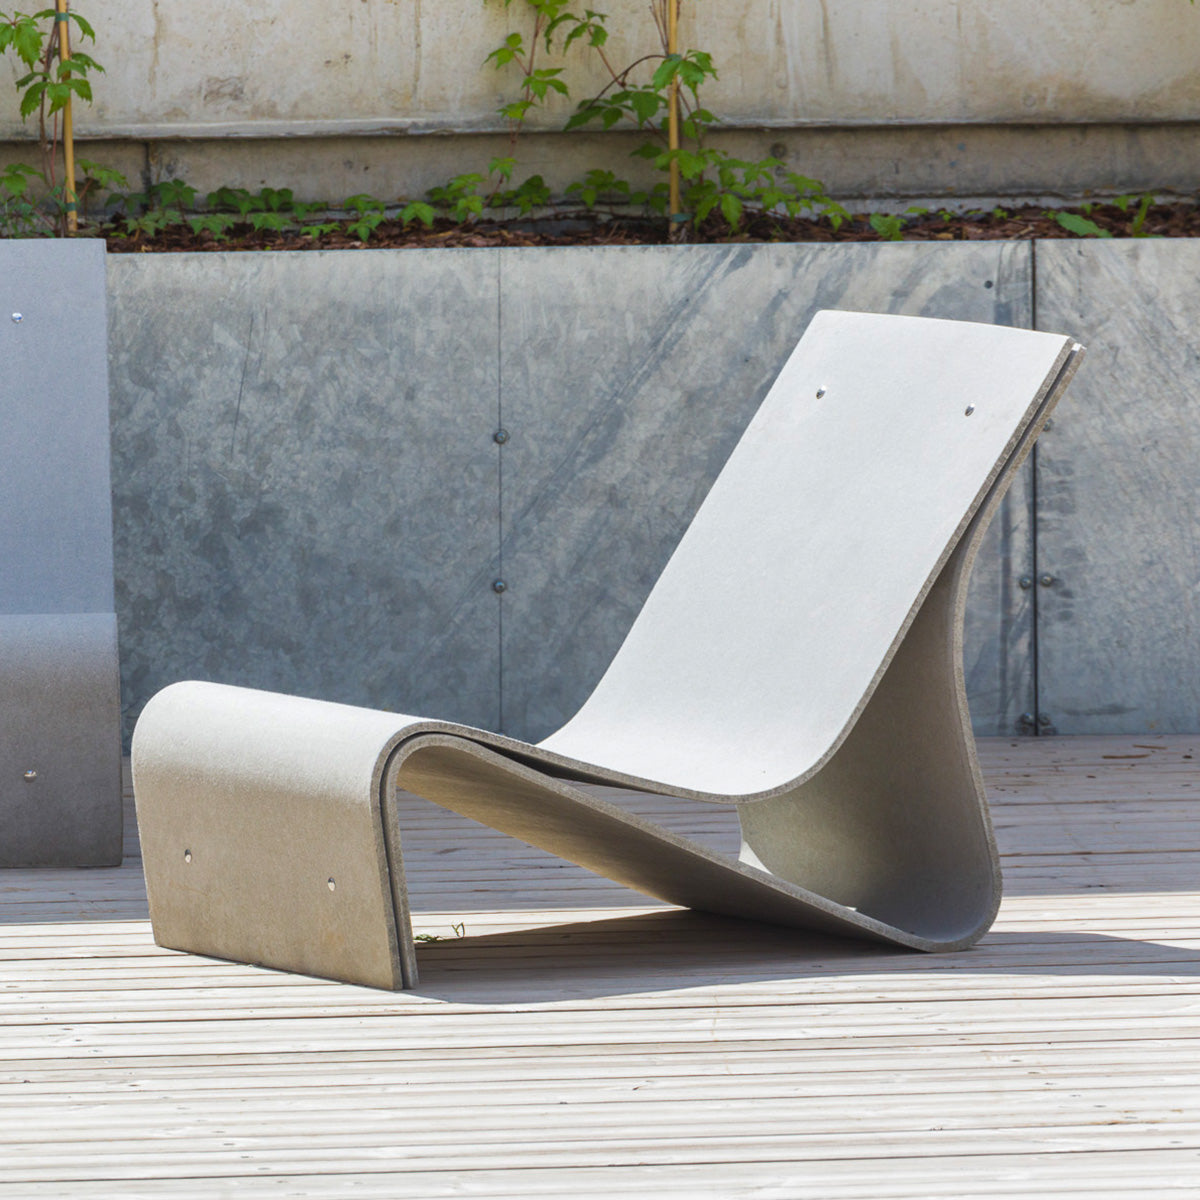 Close-up of the Sponeck Chair by Julia von Sponeck, showing off the ergonomically sophisticated shape of this modern lounge chair.